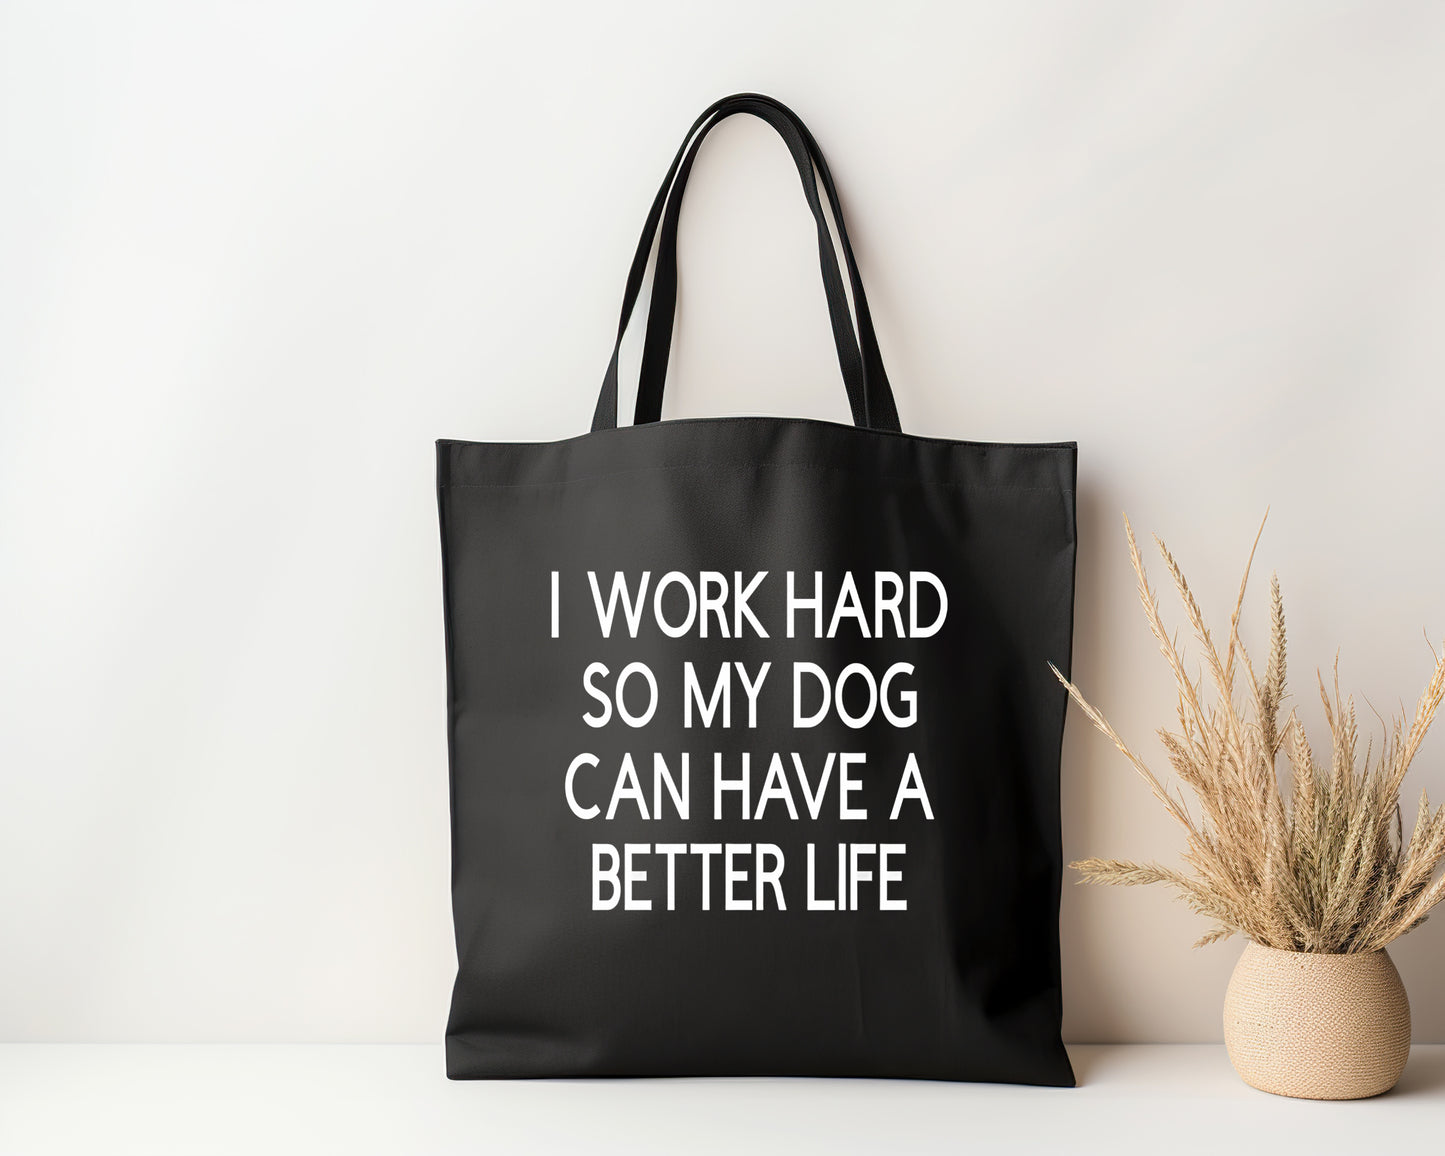 I Work Hard So My Dog Can Have a Better Life Tote